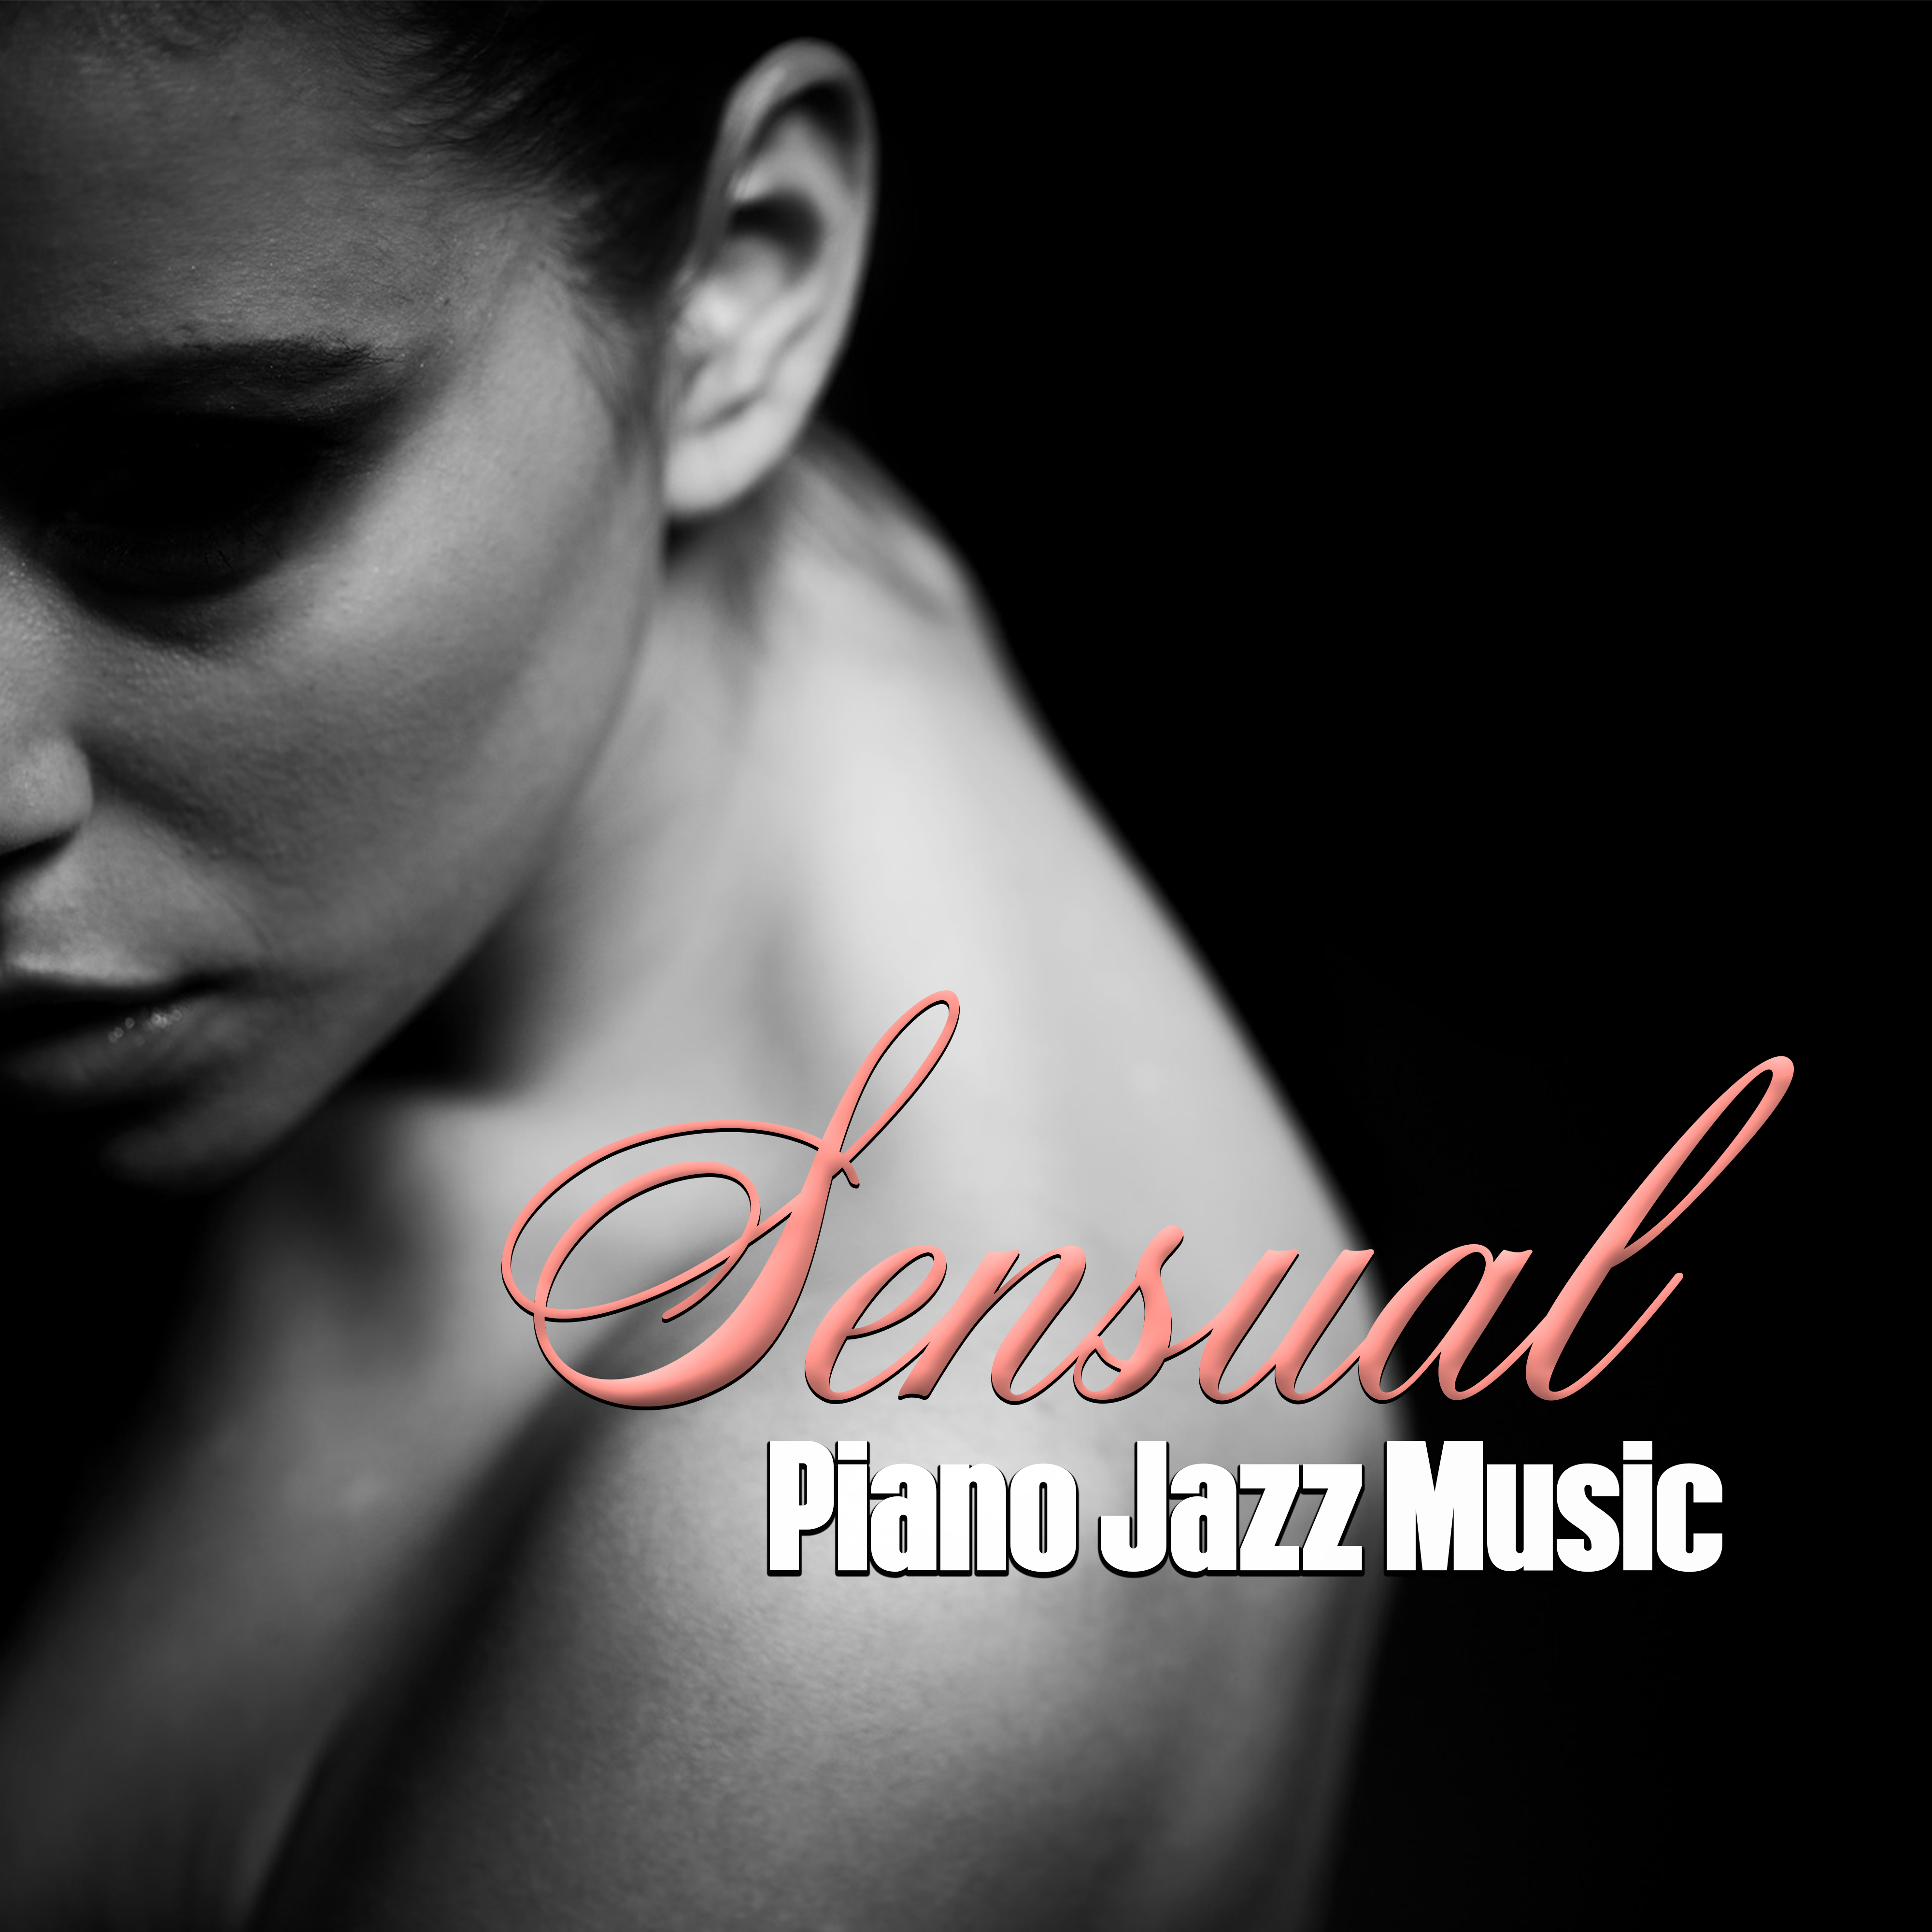 Sensual Piano Jazz Music  Calming Sounds for Lovers, Hot Kisses, First Date, Jazz Music, Instrumental Note